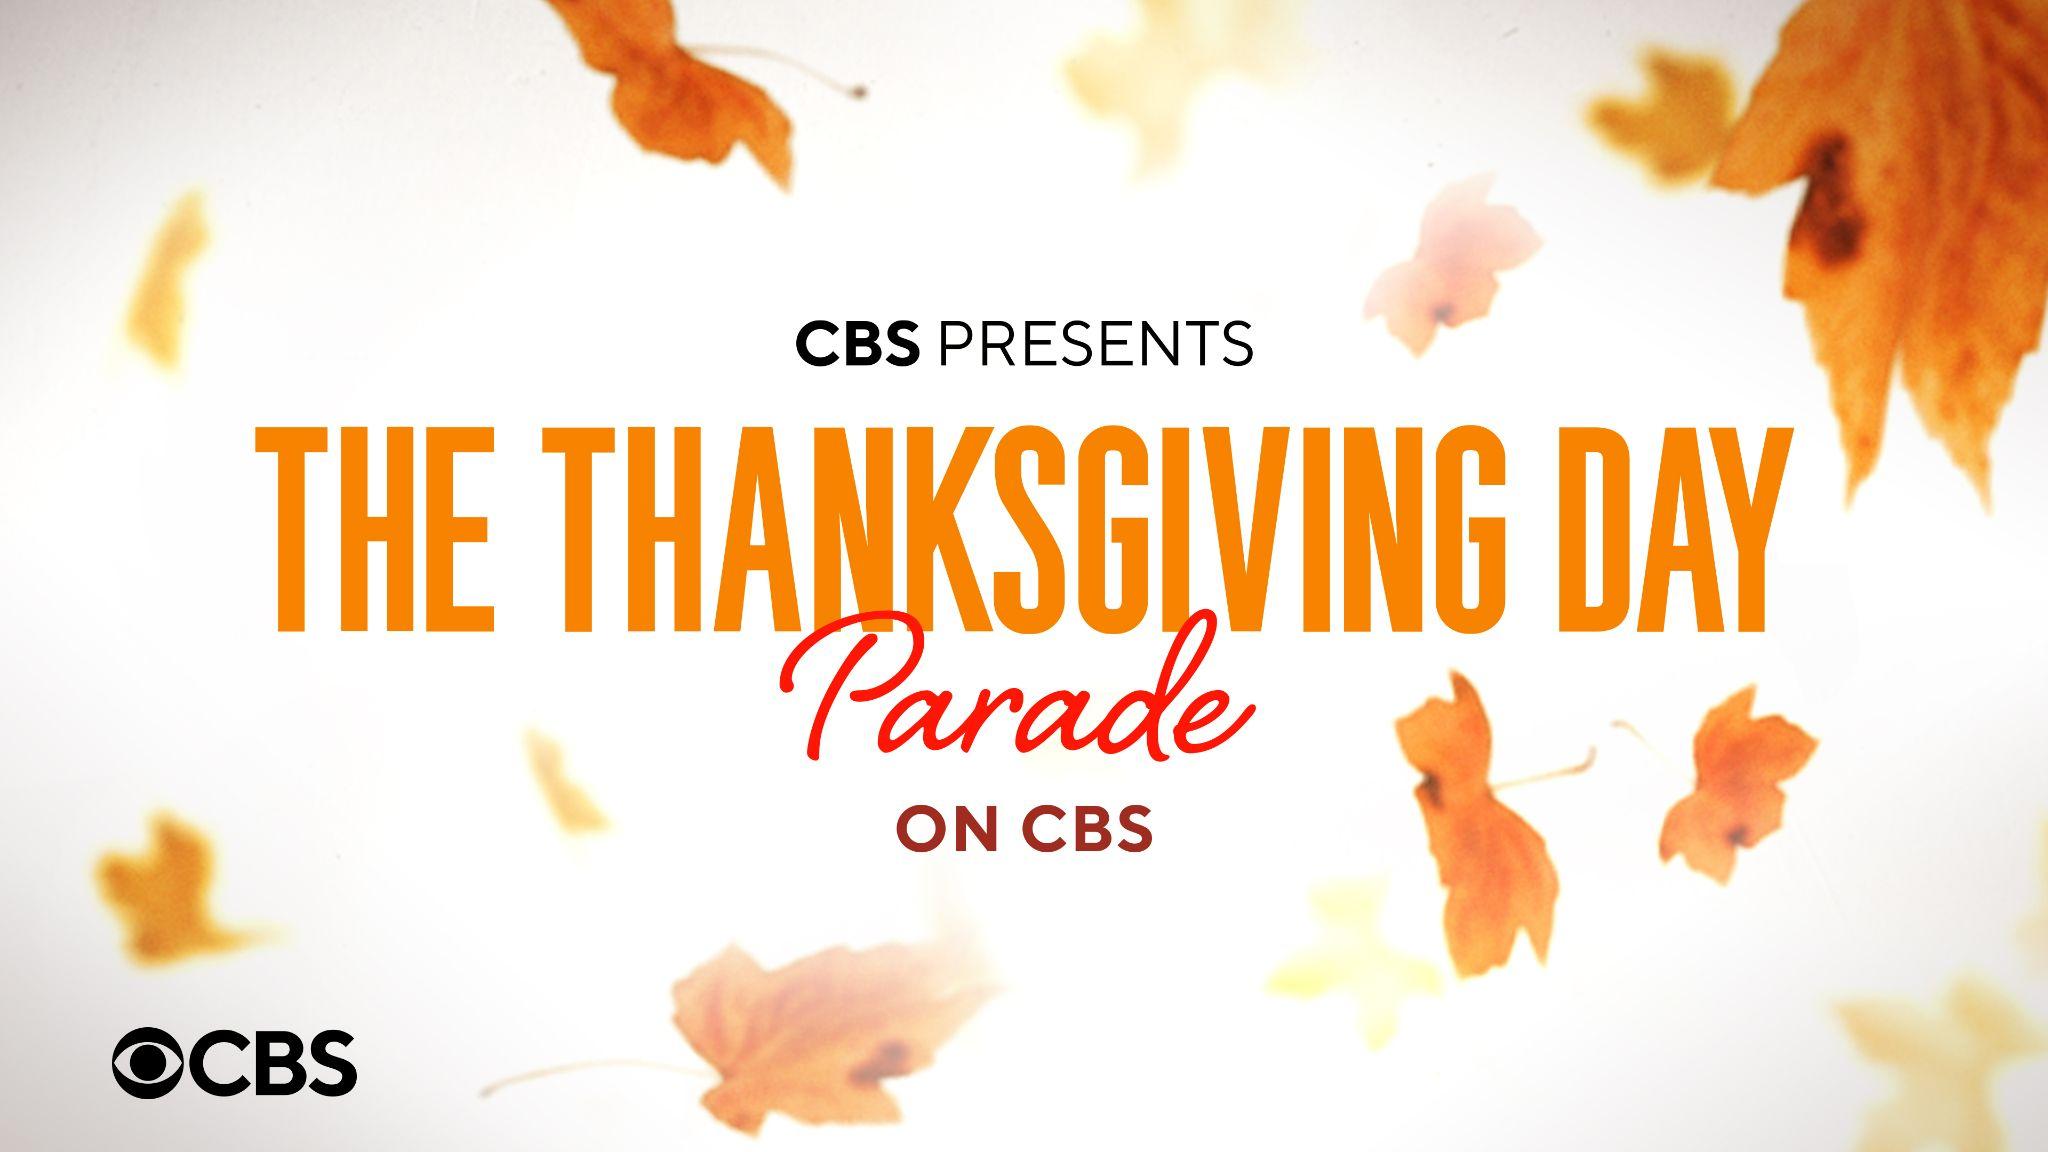 Emmy Award-Winning Hosts Kevin Frazier & Keltie Knight to Anchor "The Thanksgiving Day Parade"